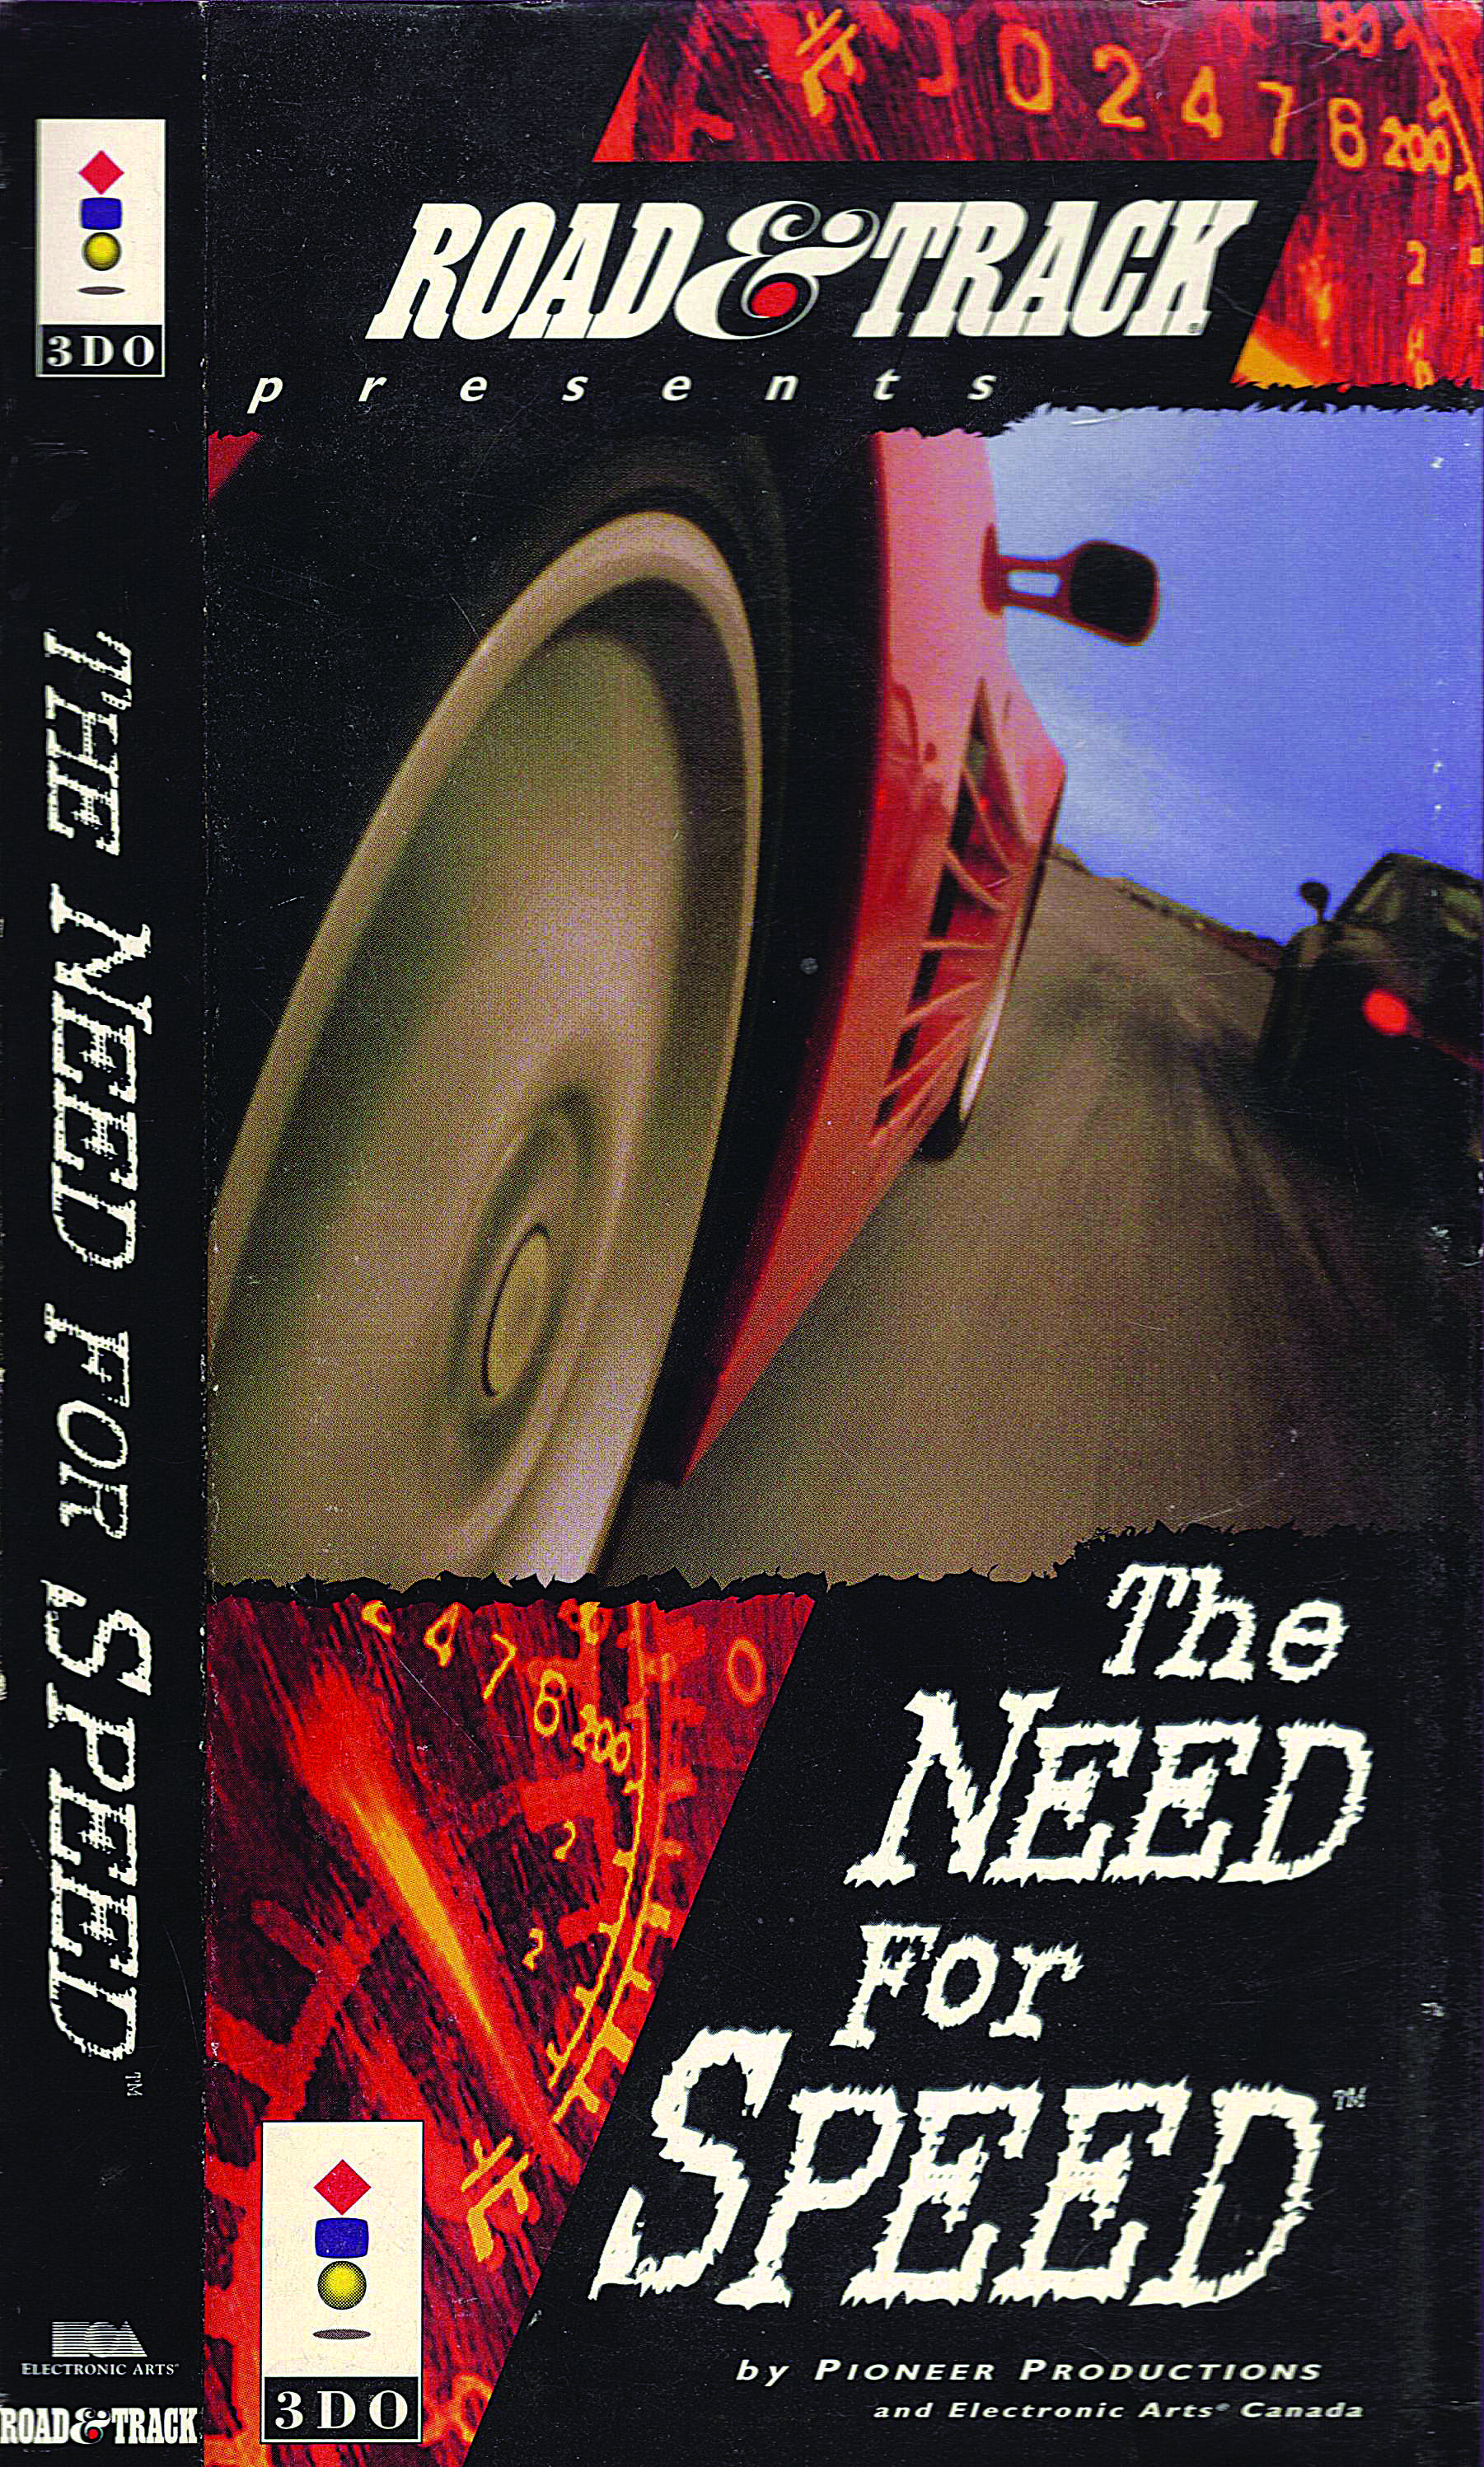 Road & Track Presents: The Need for Speed